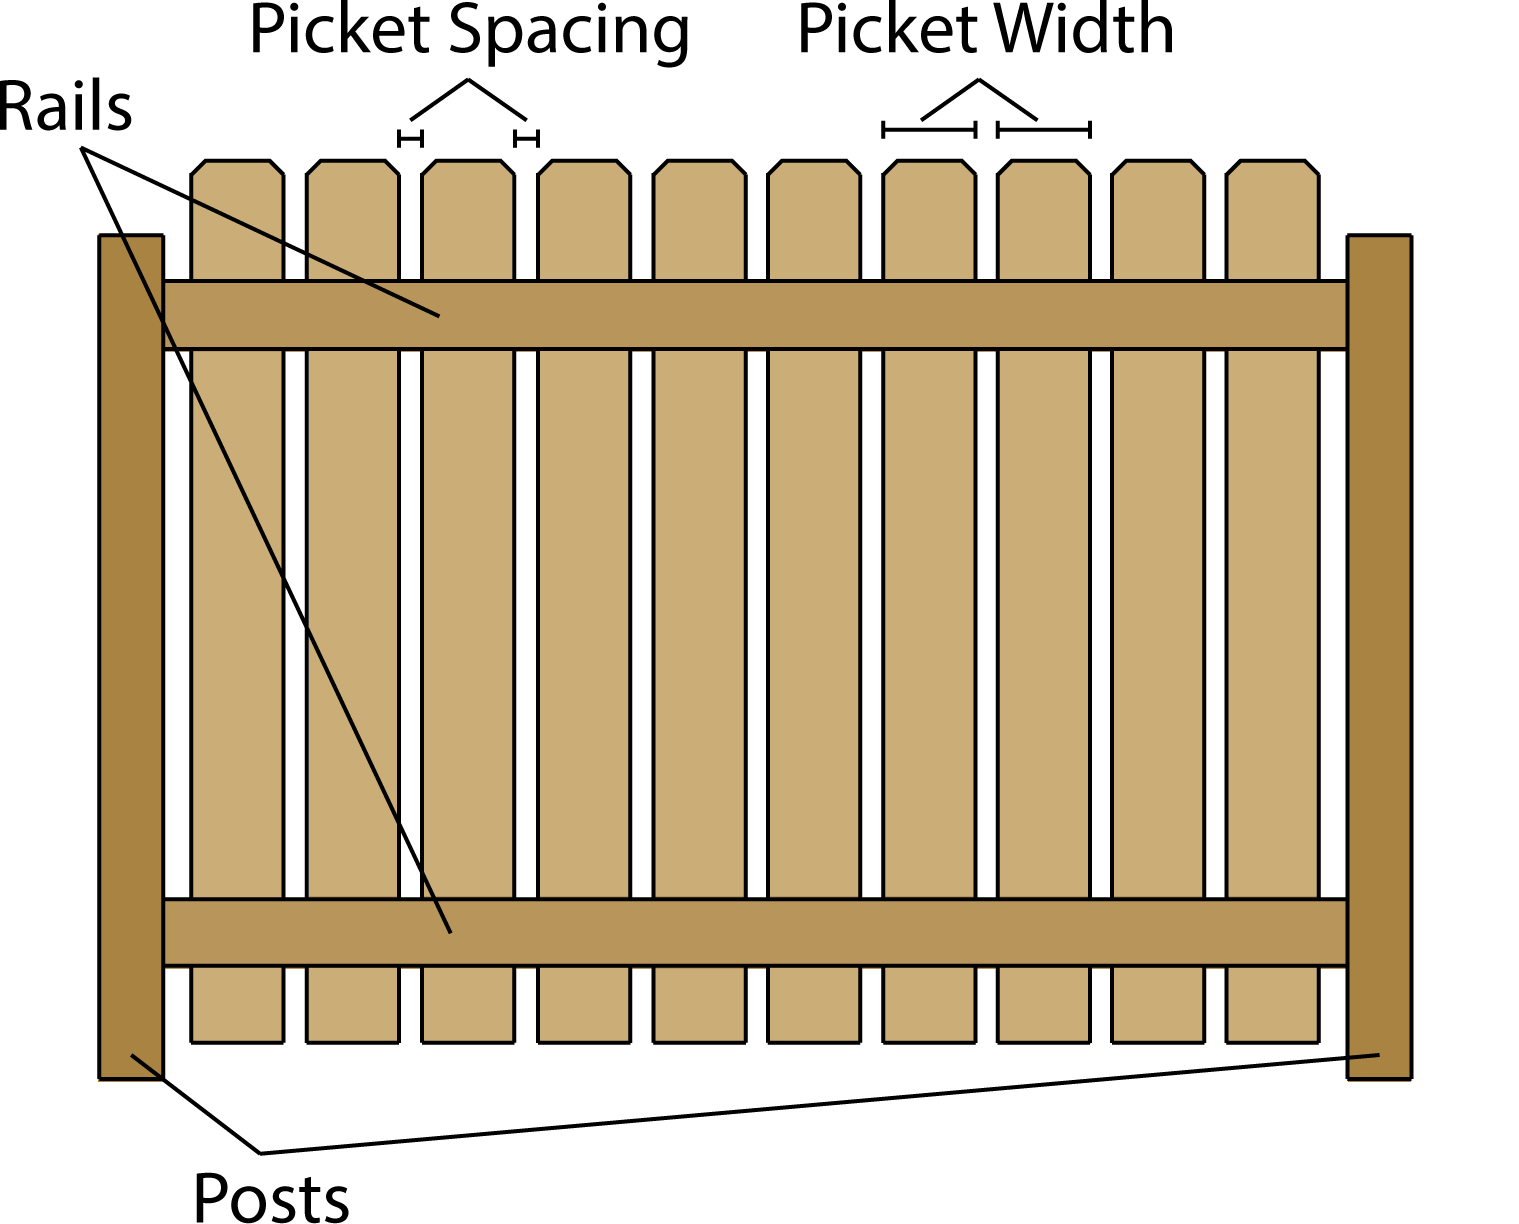 Fence Calculator - Estimate Wood Fencing Materials and 